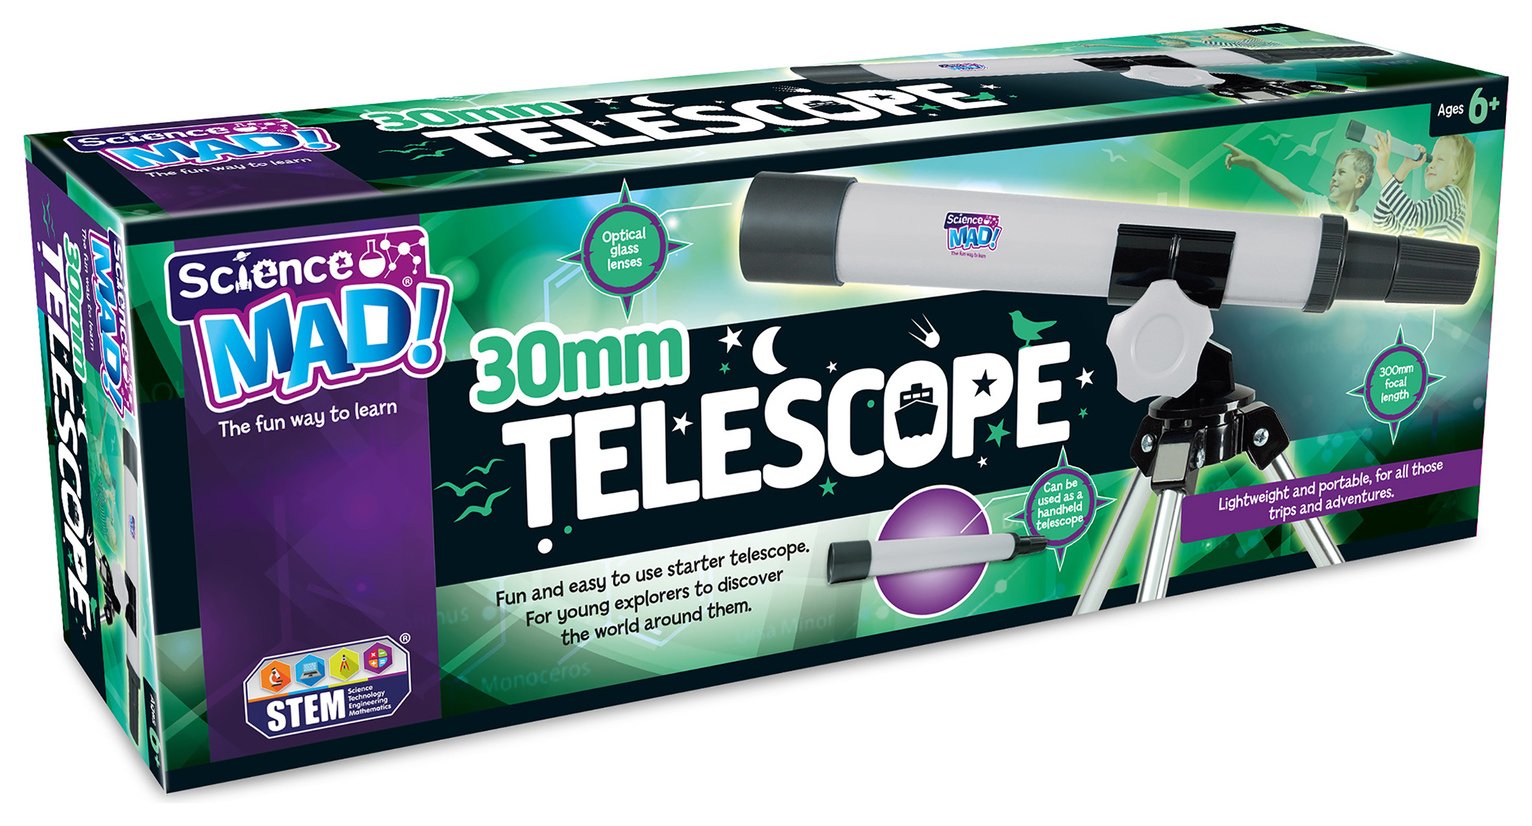 Science Mad 30mm Telescope with Tripod